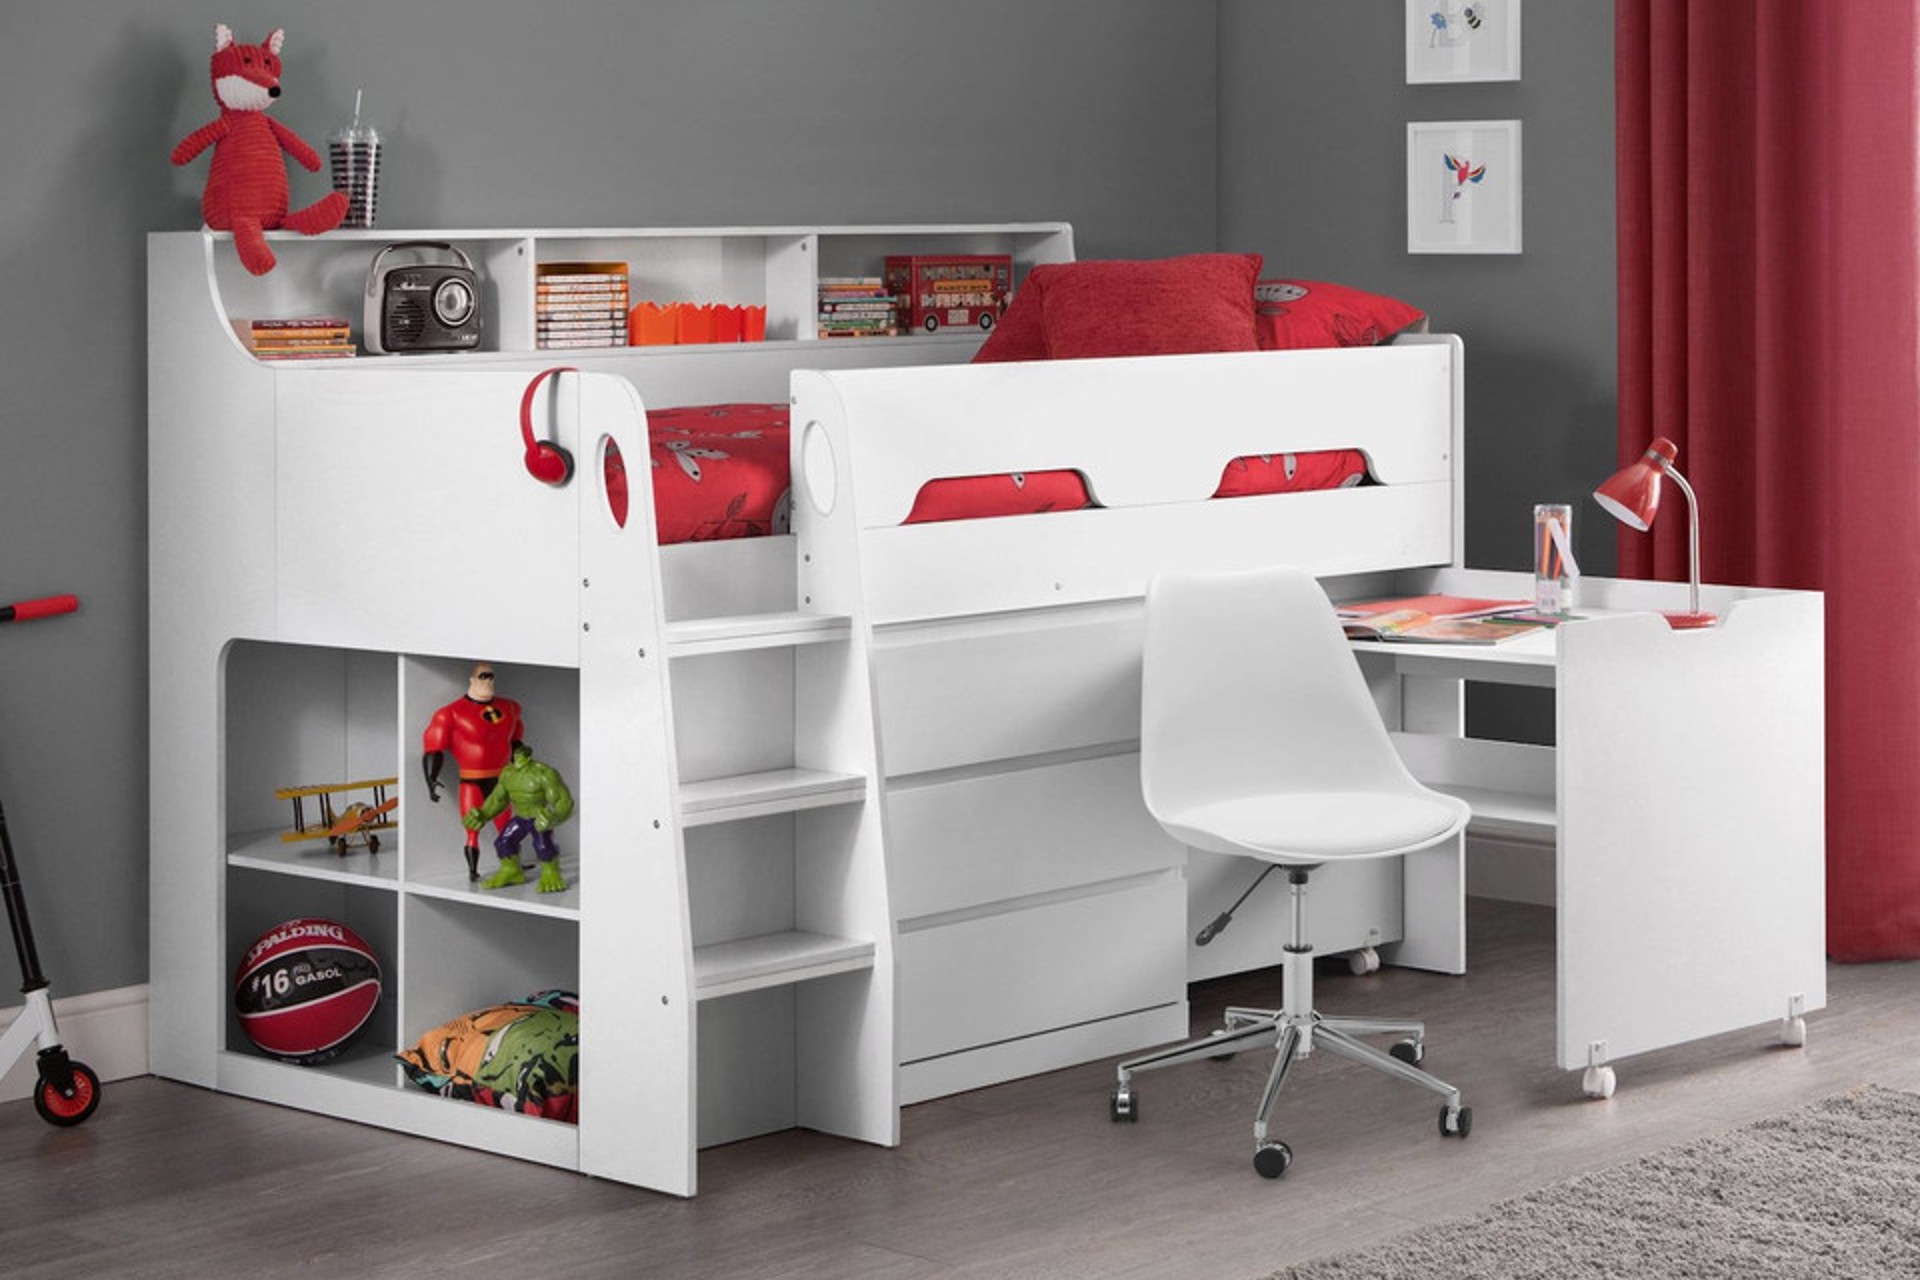 Jupiter white wooden midsleeper bed featuring a desk, drawers and storage shelves for kids